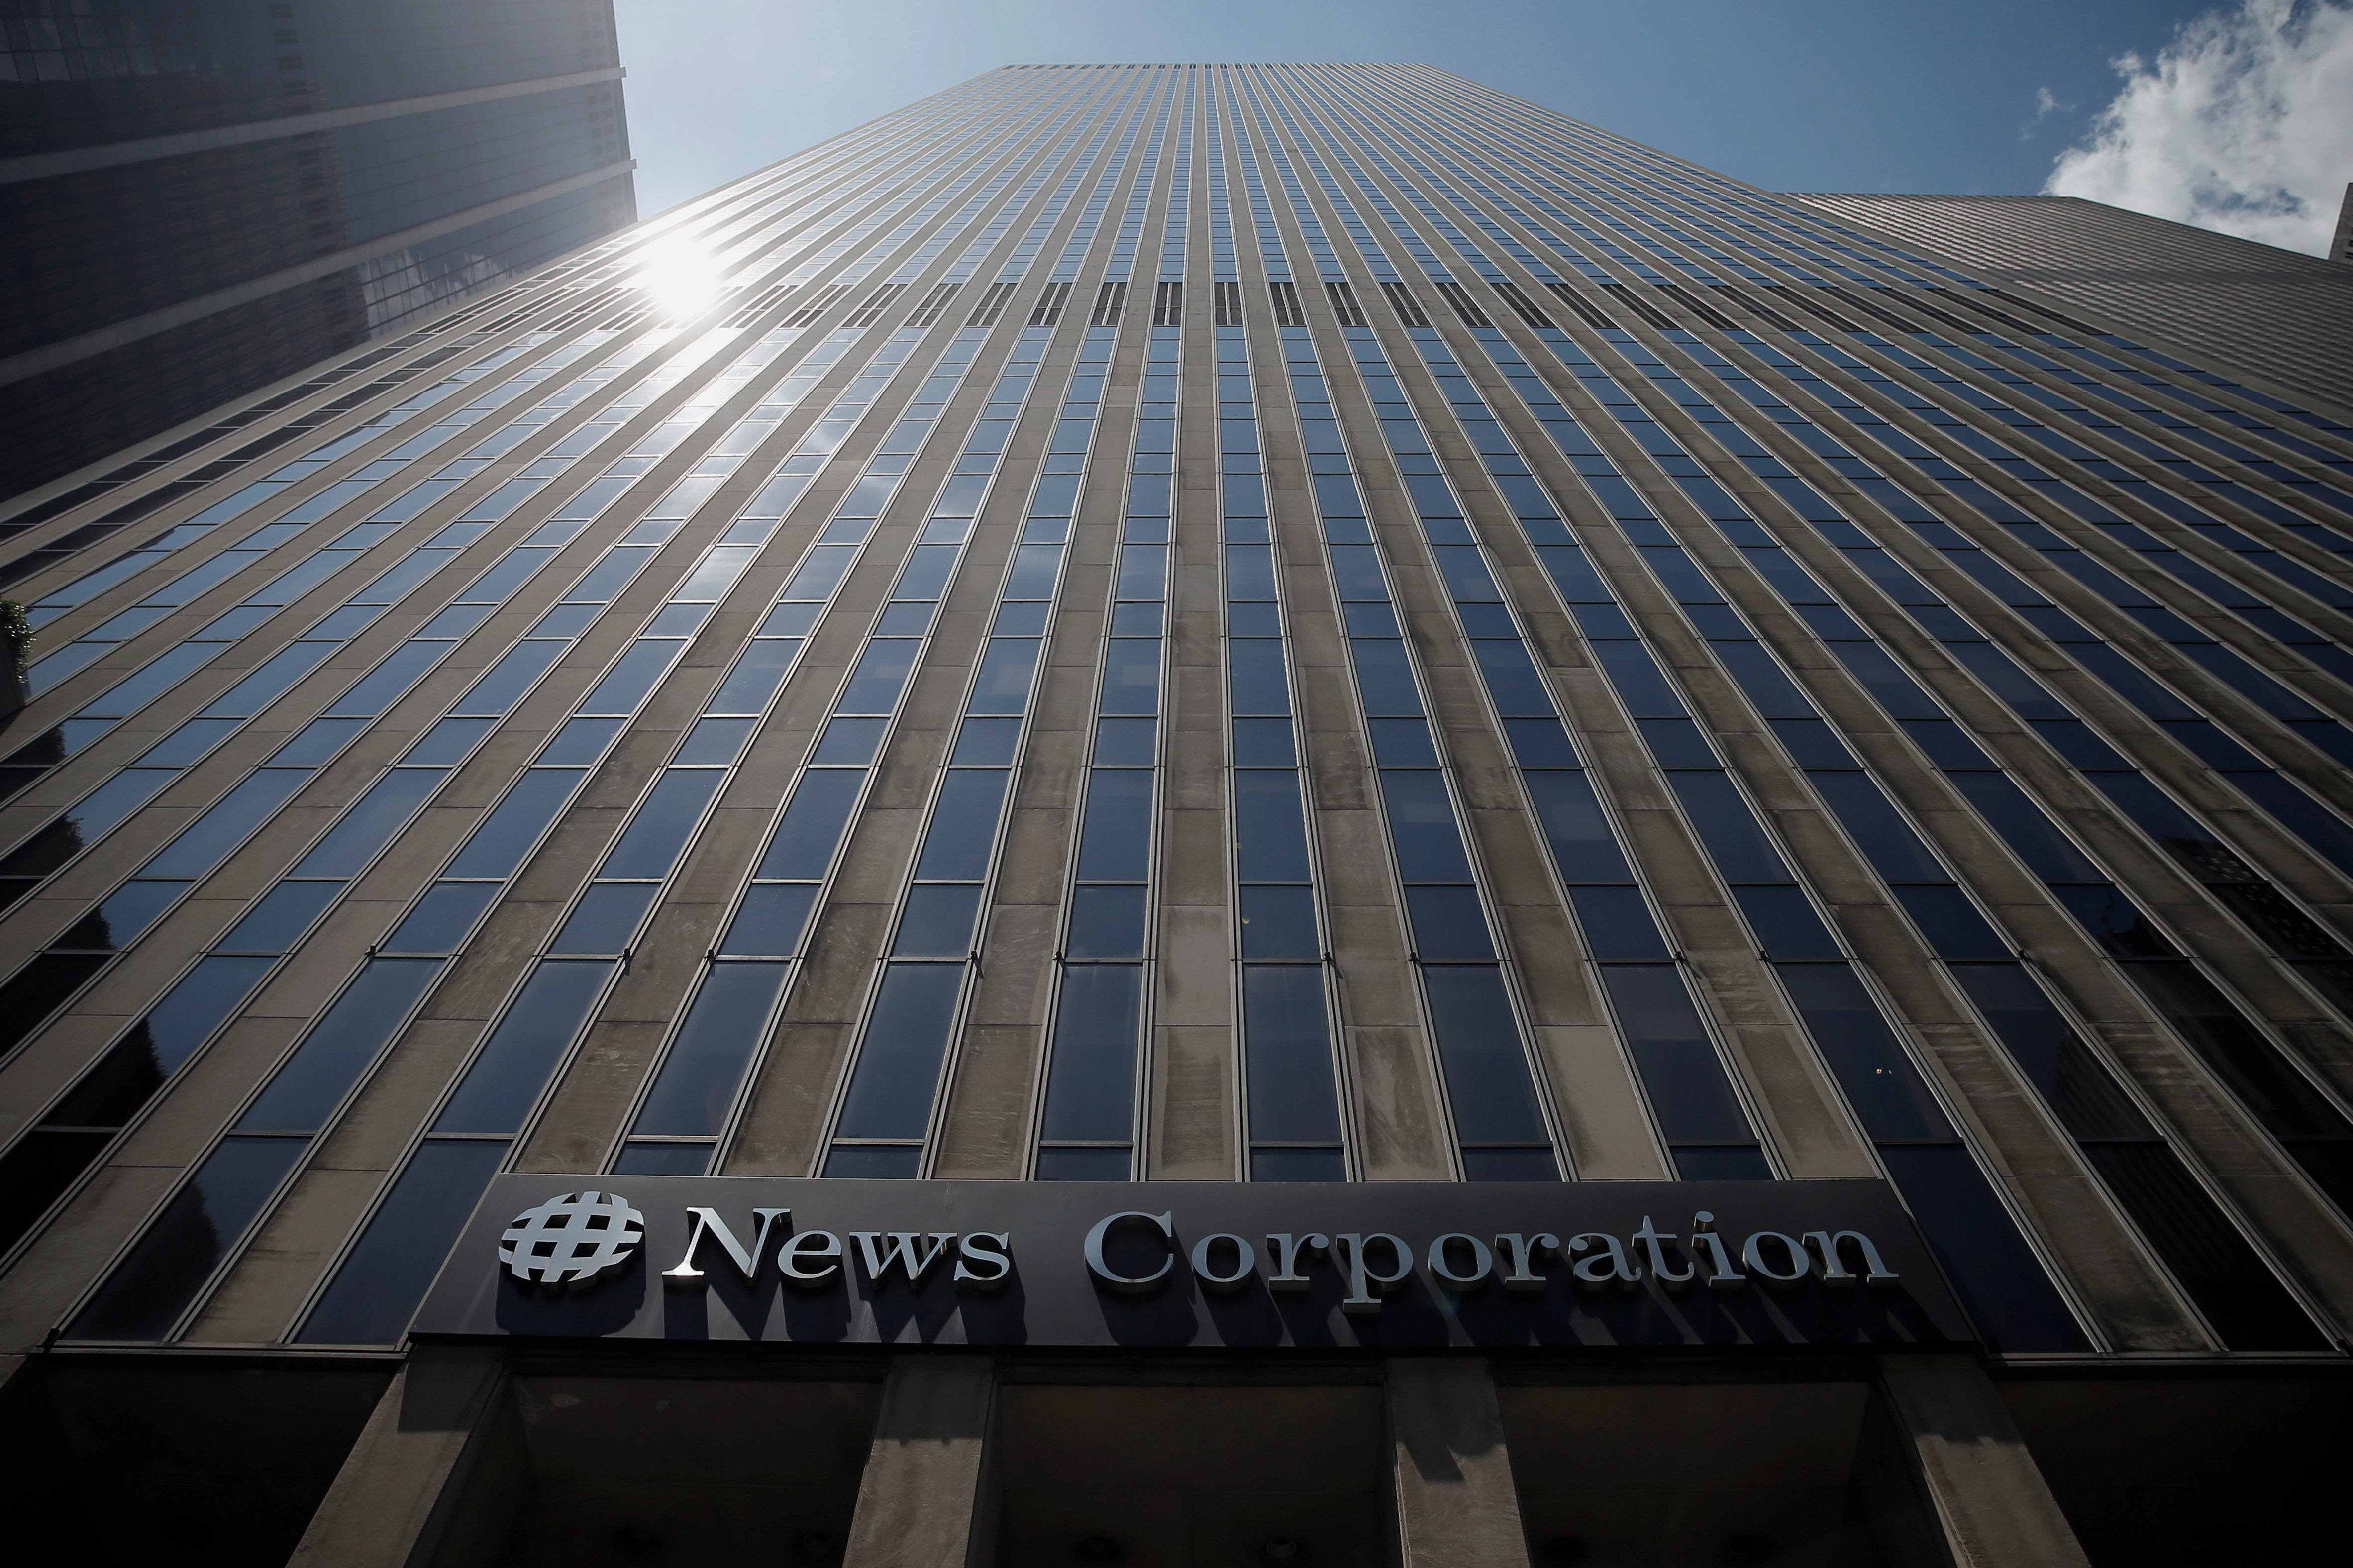 The News Corporation headquarters building, home to Fox News, is seen in New York